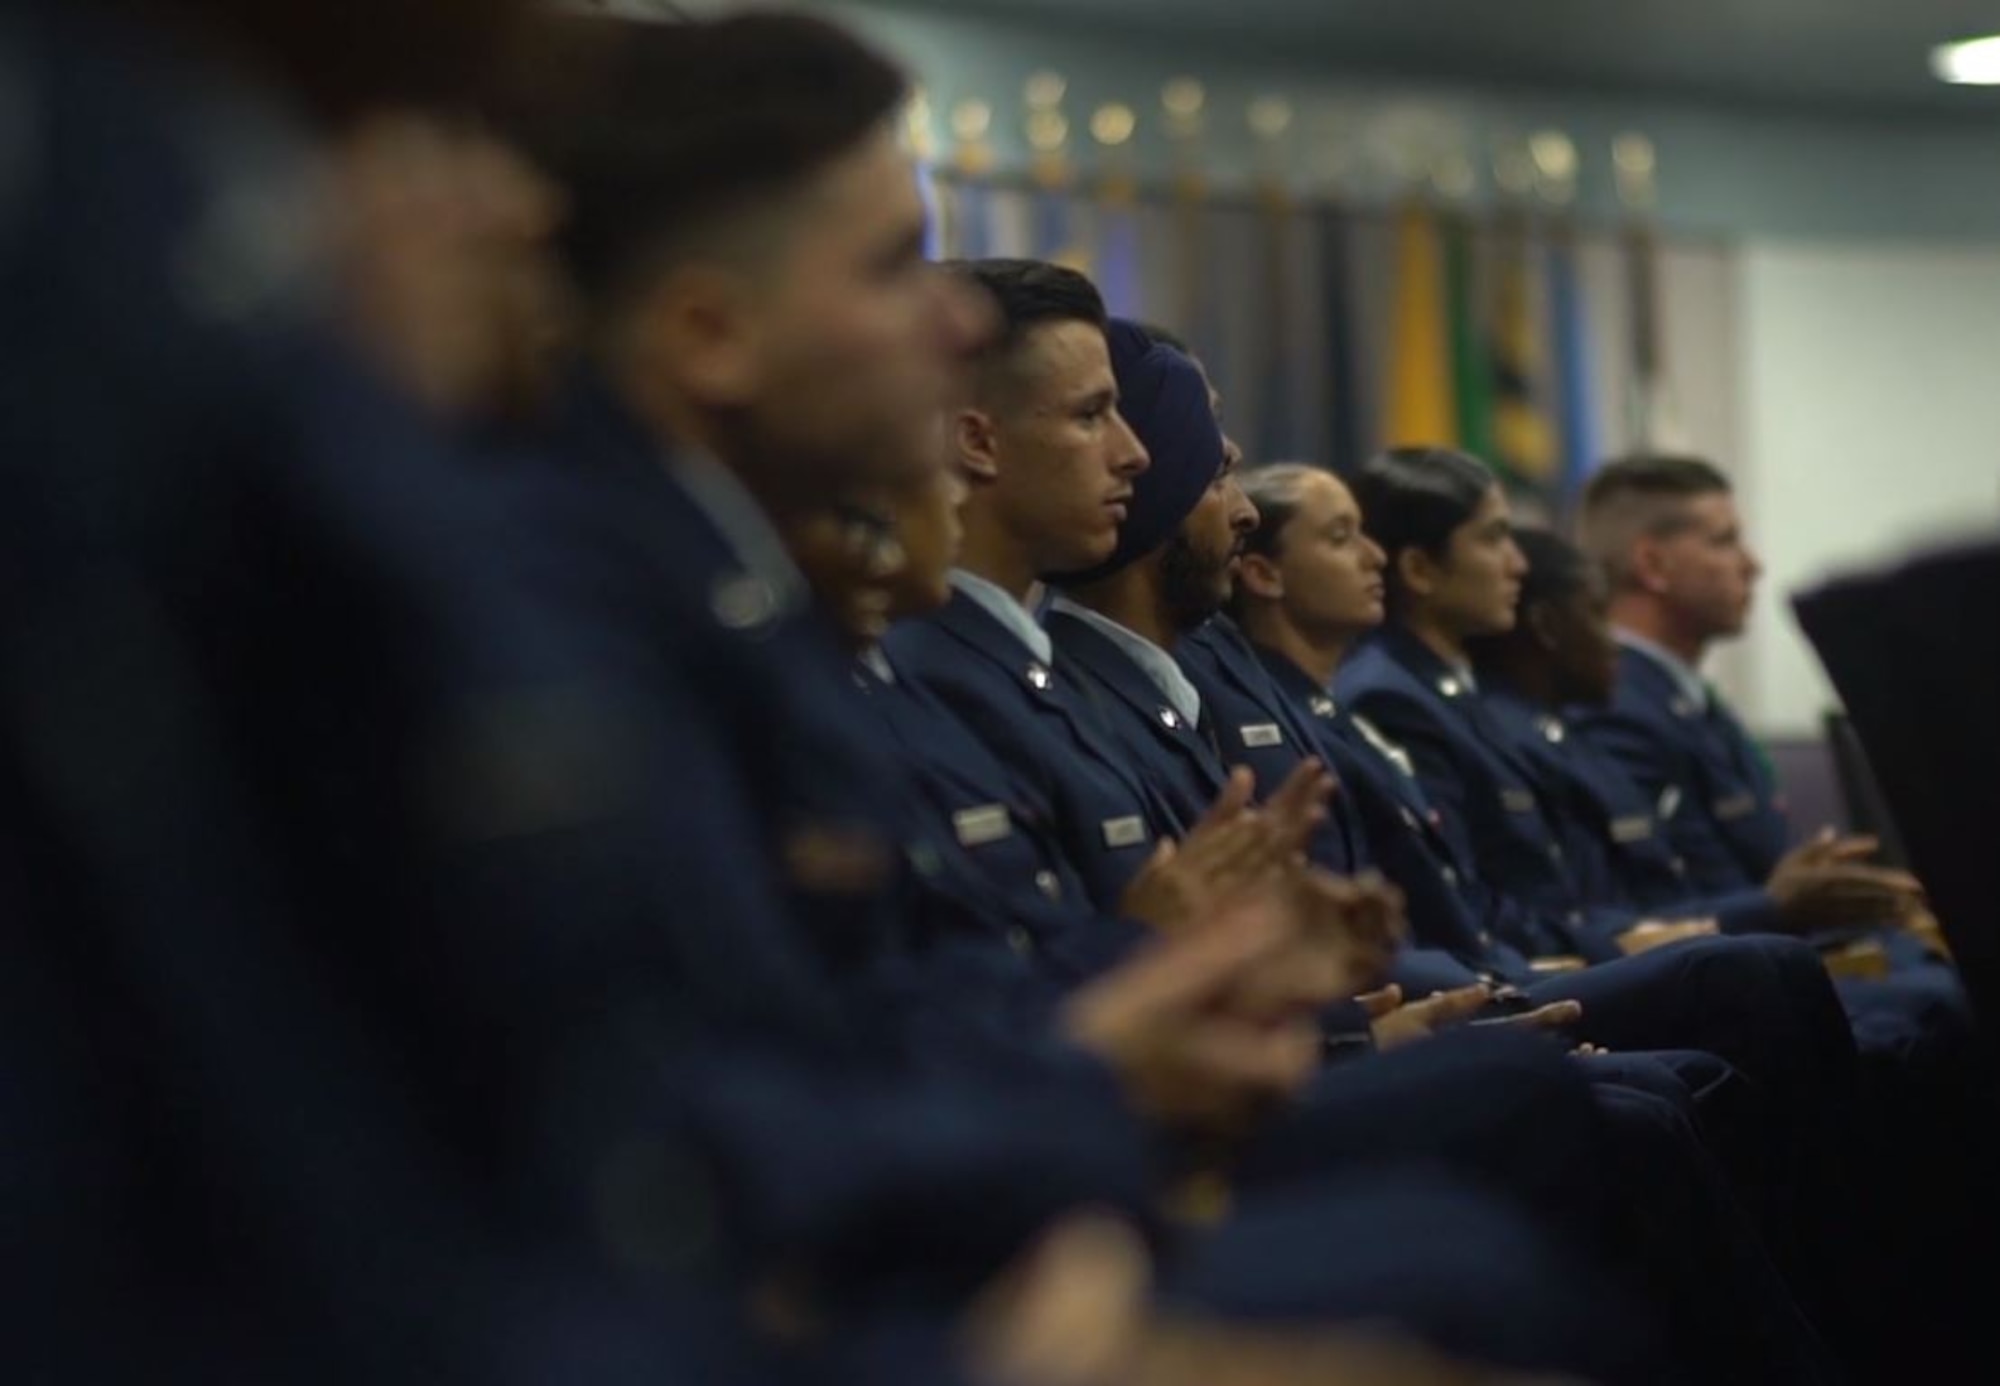 Airman 1st Class Sunjit Rathour earns his Security Forces beret as the first Sikh Airman to secure full religious accommodation, starting at Basic Military Training through Security Forces Apprentice Course, to wear a turban and remain unshaven in uniform. He graduated Security Forces technical training at Joint Base San Antonio, Lackland September 26, 2019.